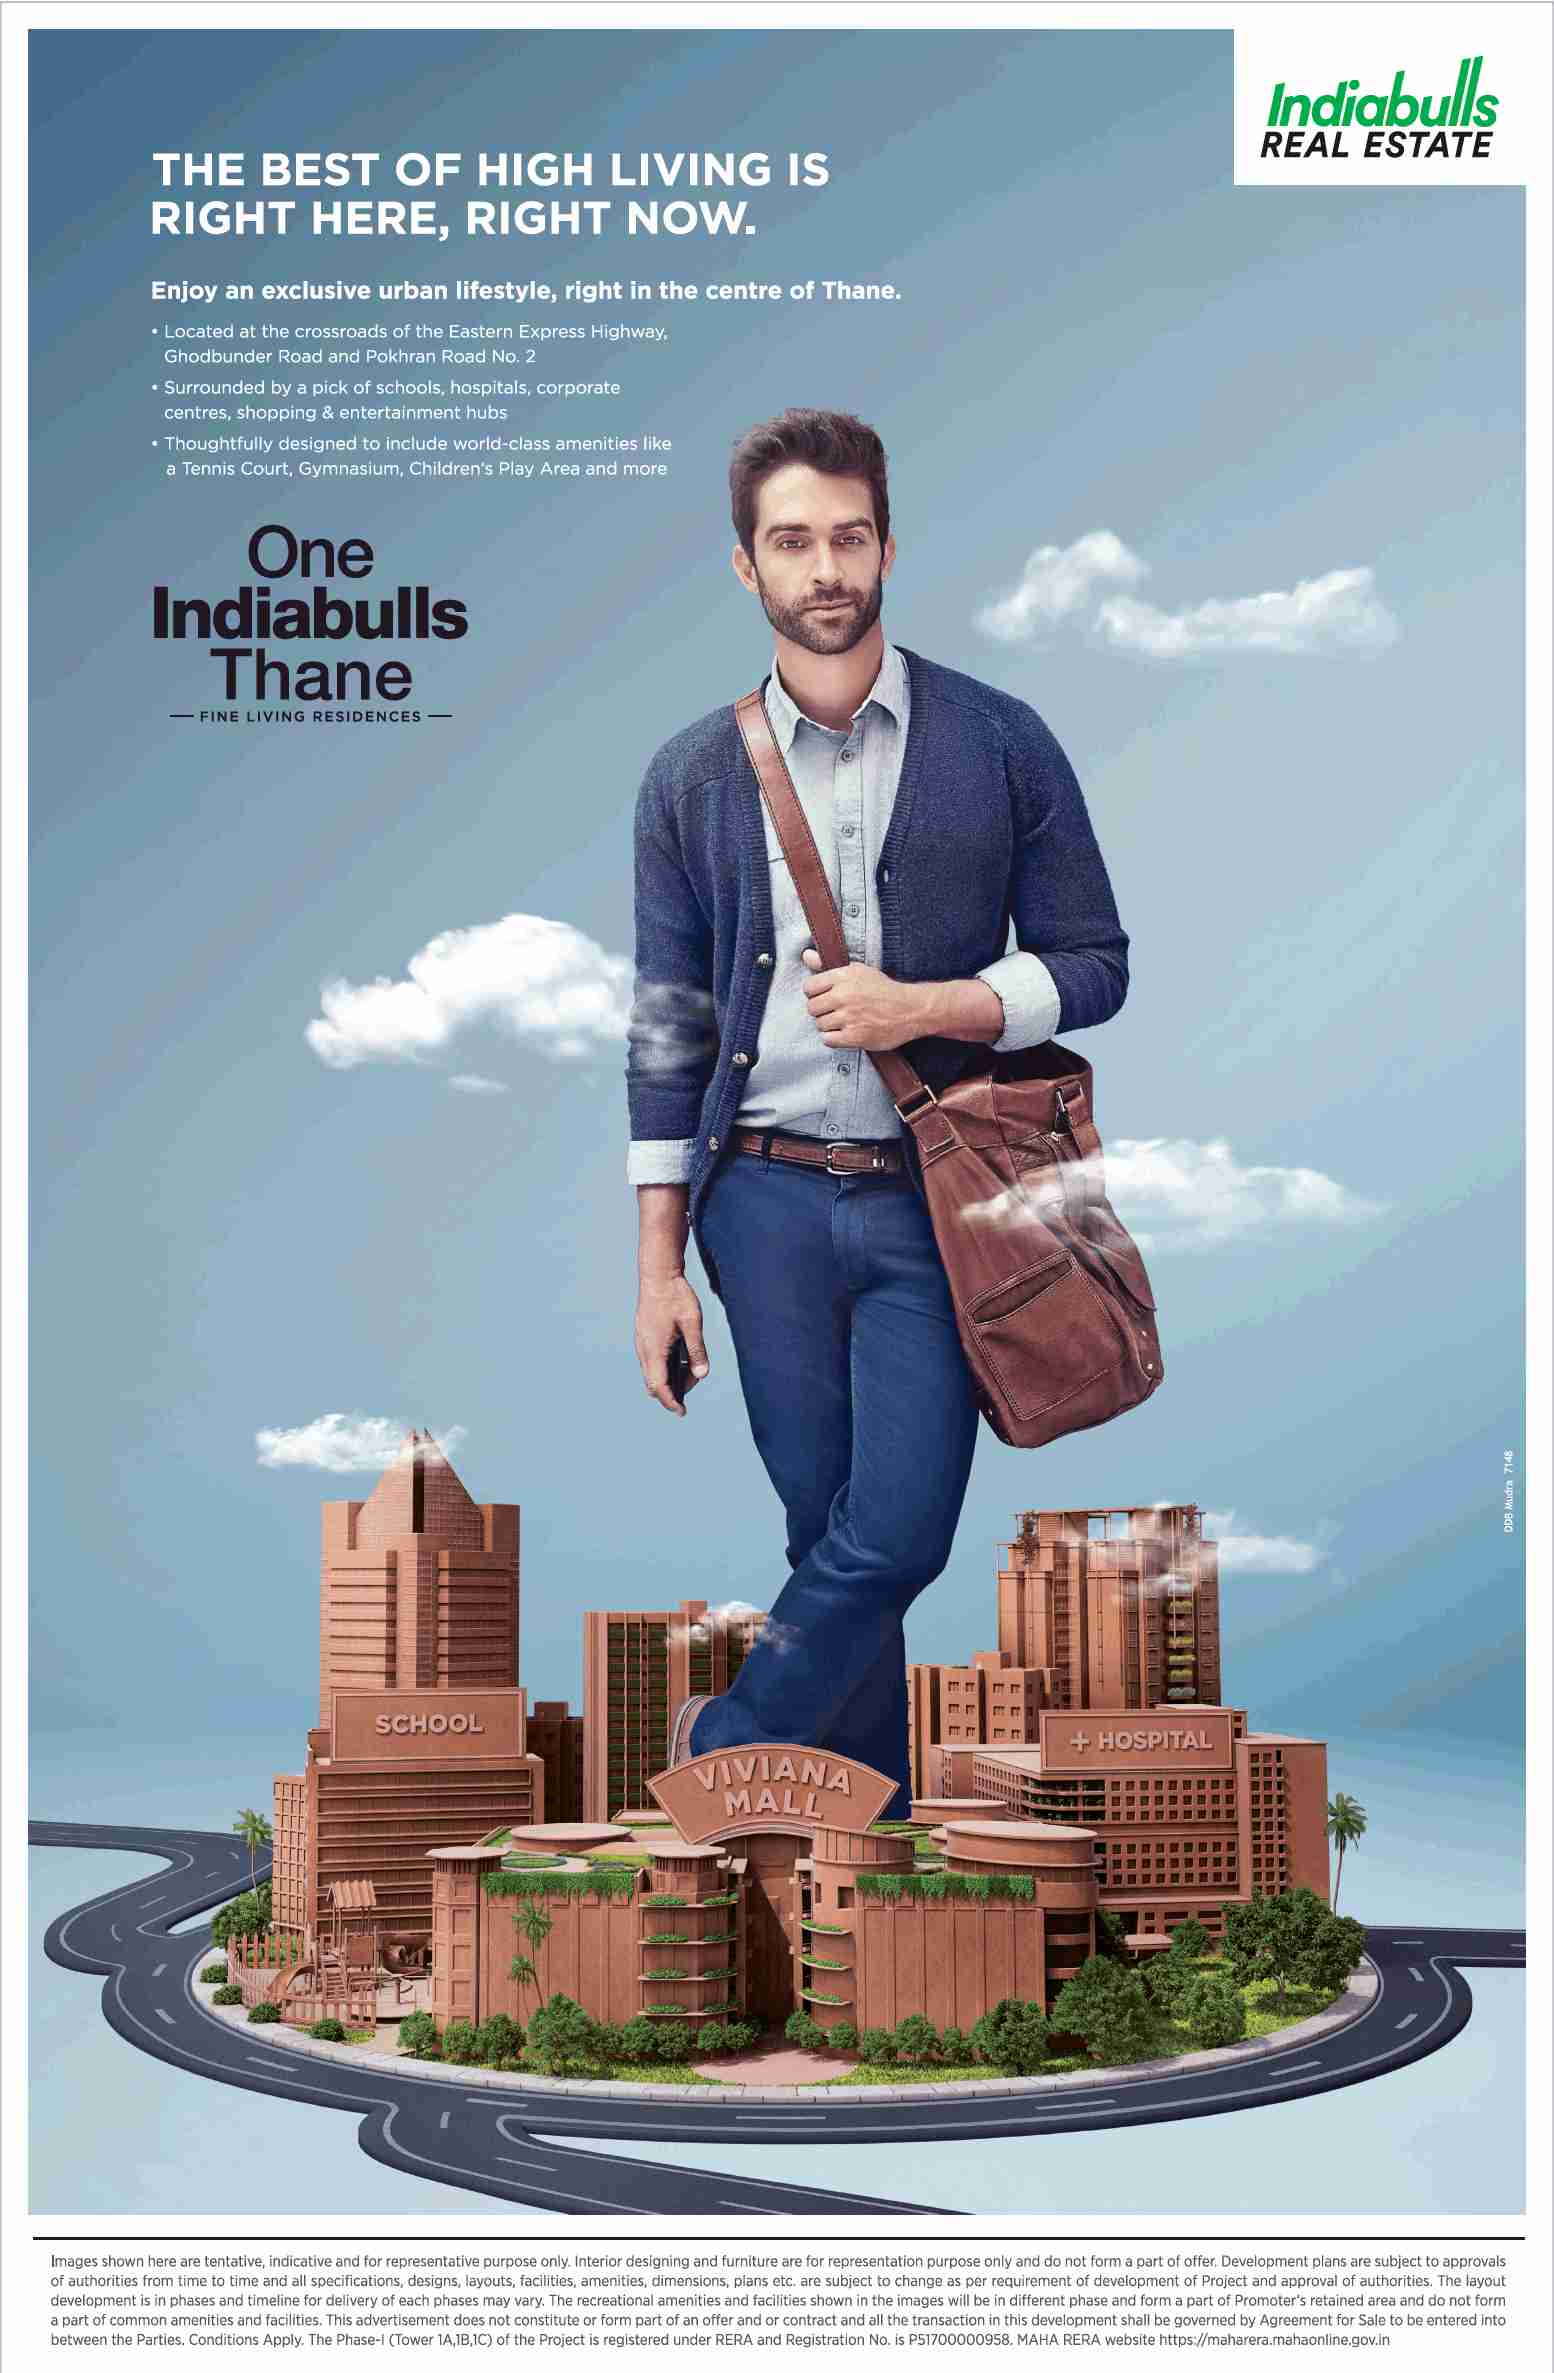 Enjoy an exclusive urban lifestyle right in the centre of Thane at One Indiabulls Thane in Mumbai